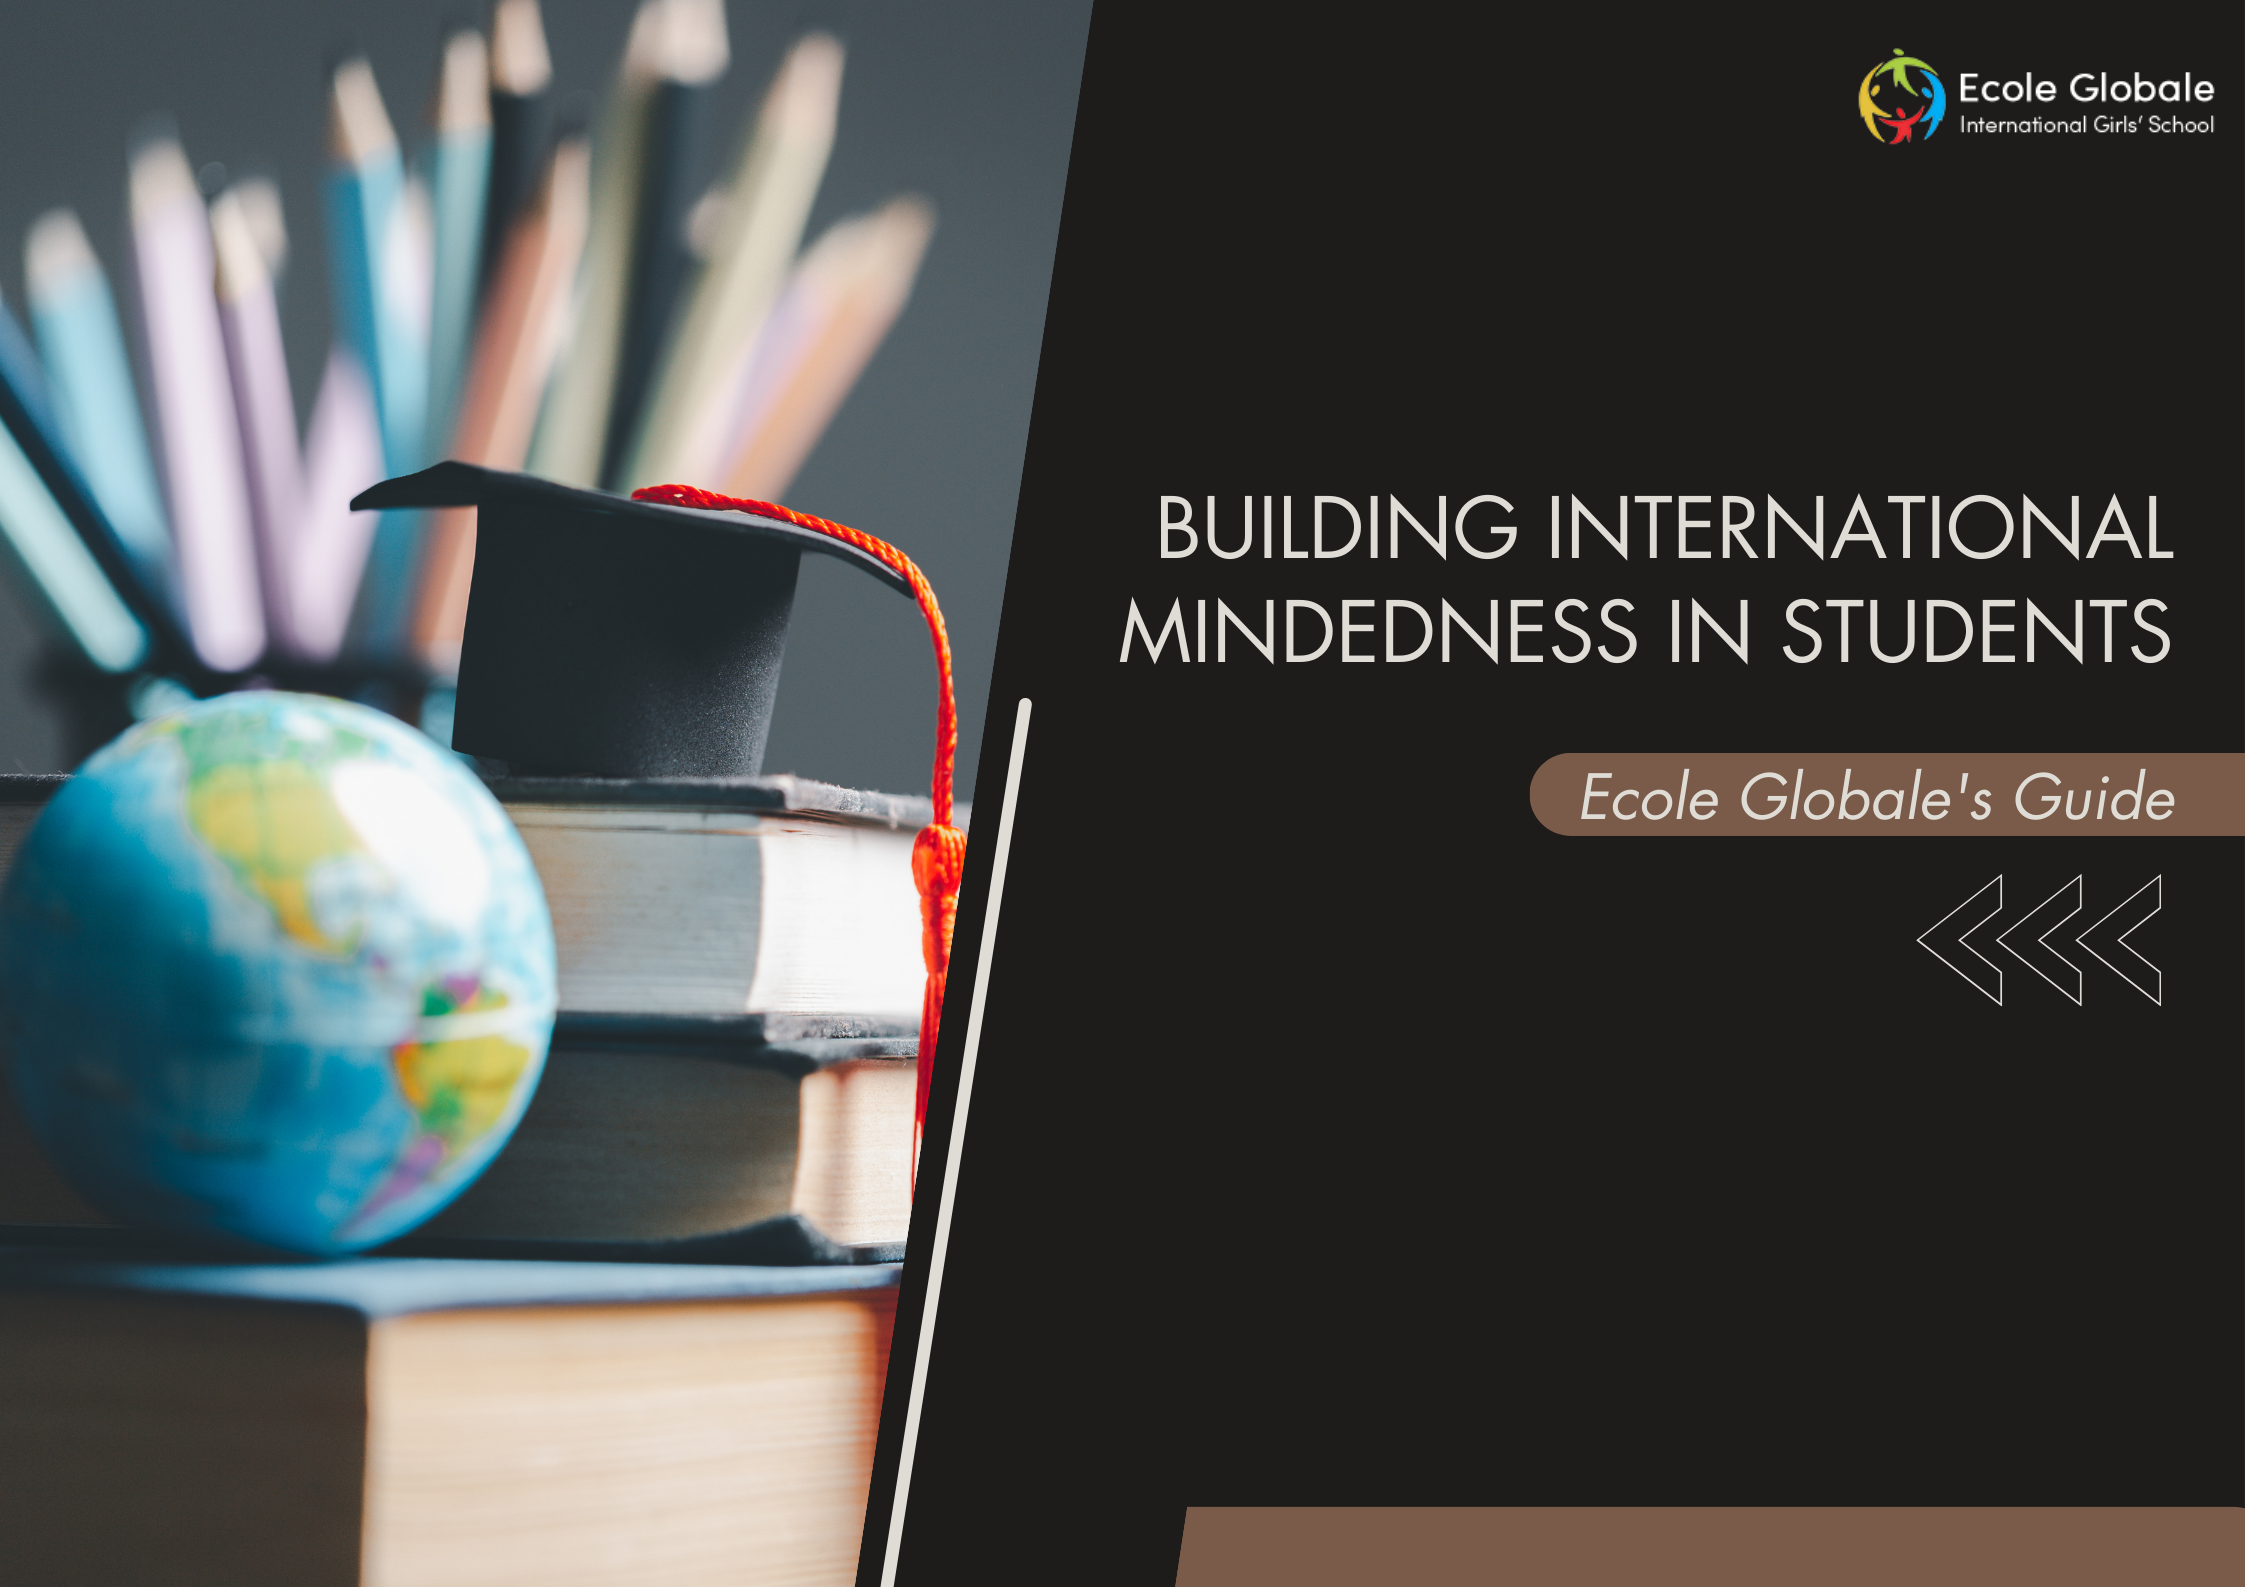 You are currently viewing Ecole Globale’s Guide to Building International Mindedness in Students